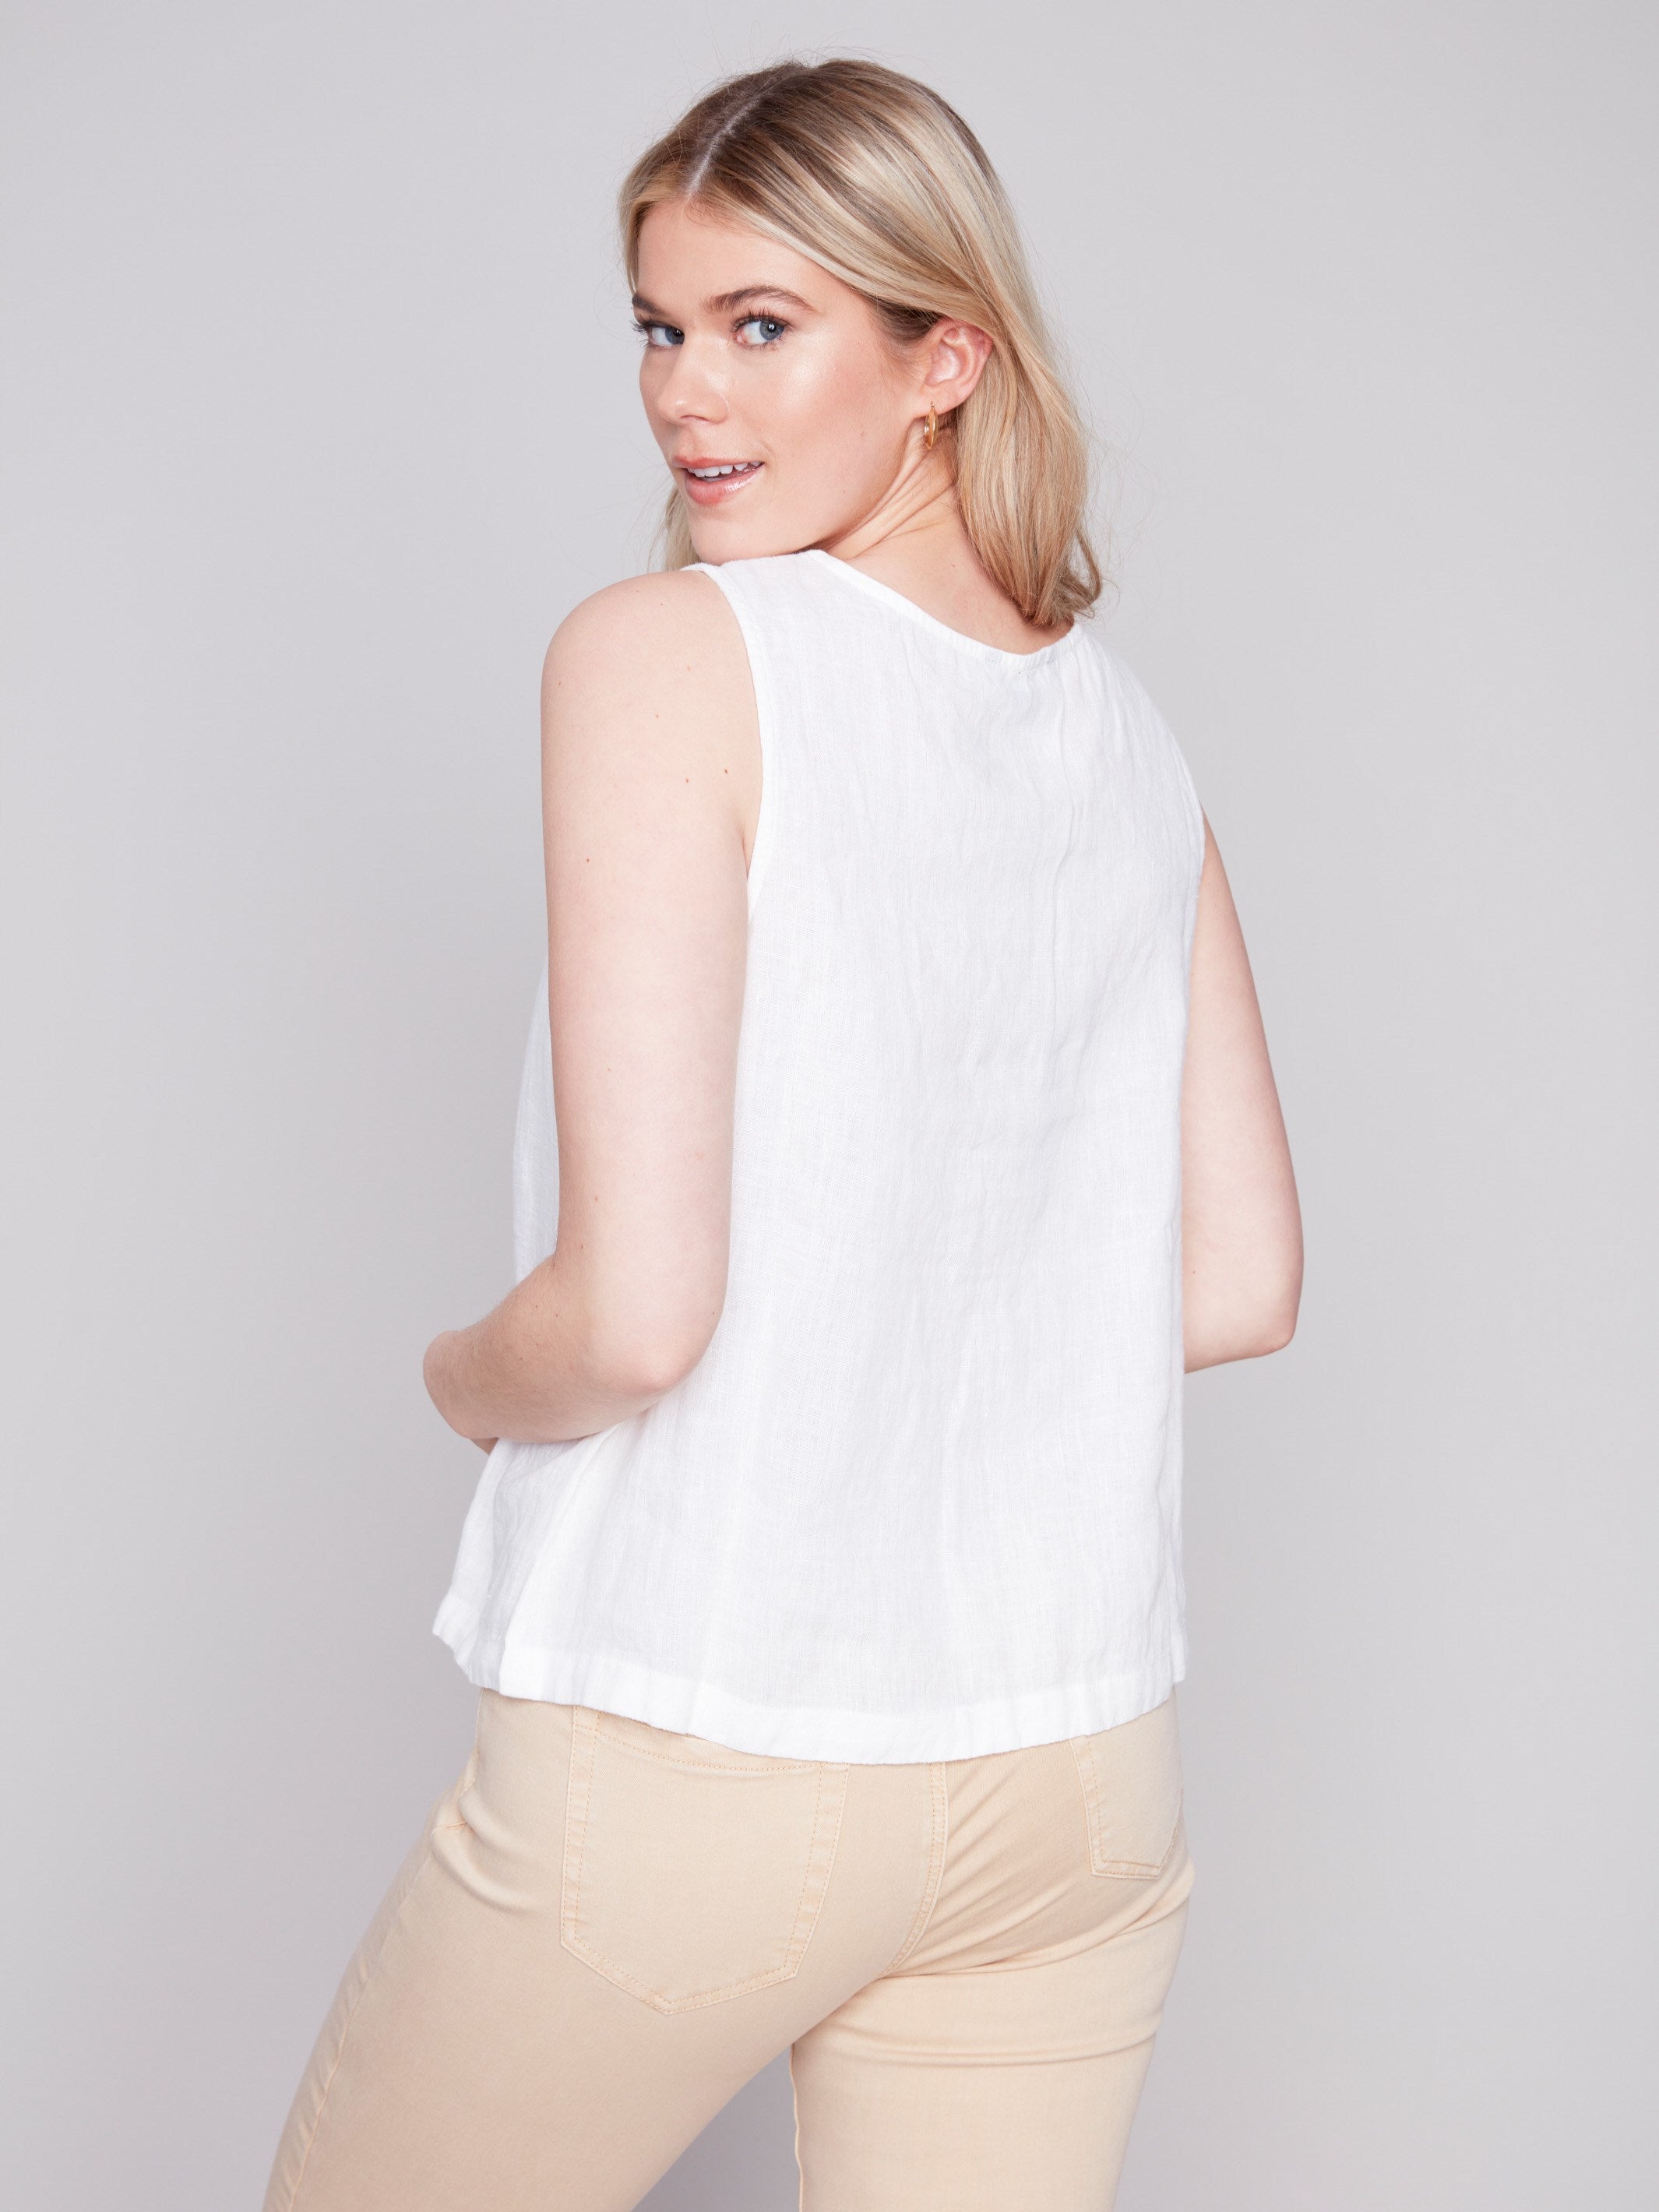 Sleeveless Linen Top with Button Detail - White - Charlie B Collection Canada - Image 2